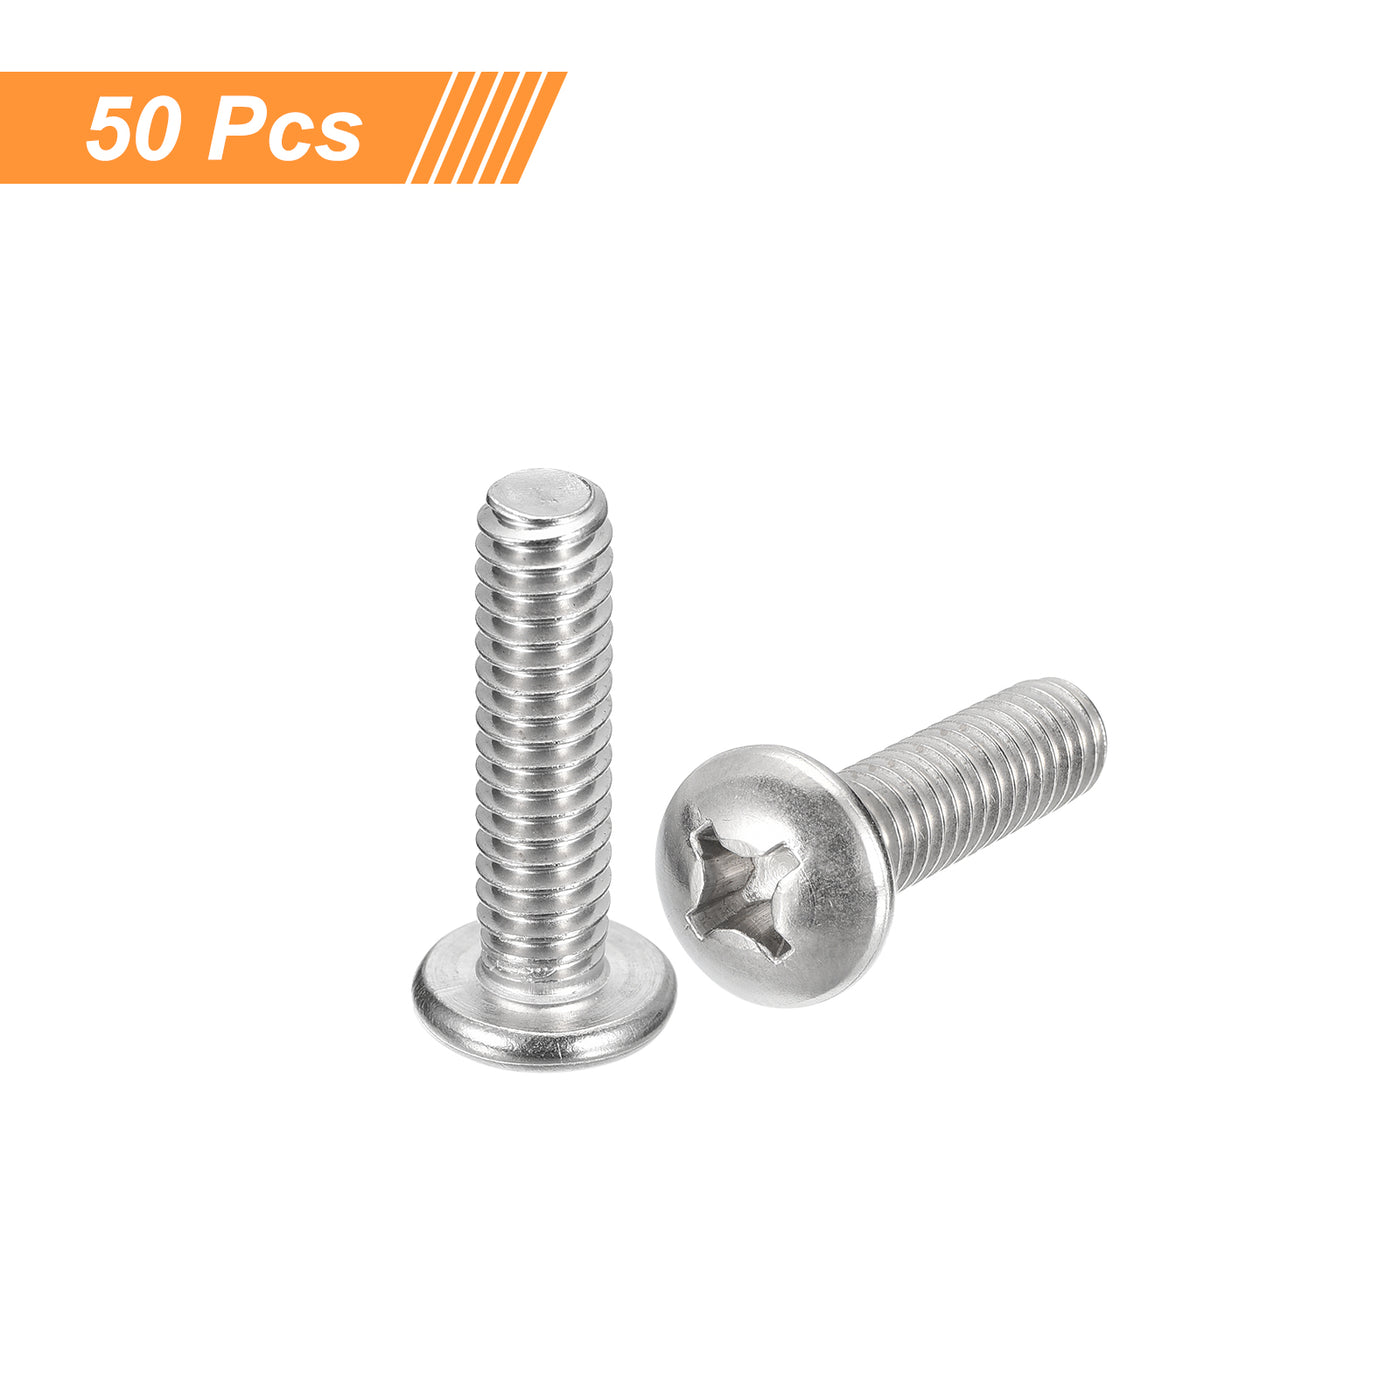 uxcell Uxcell 1/4-20x1" Pan Head Machine Screws, Stainless Steel 18-8 Screw, Pack of 50